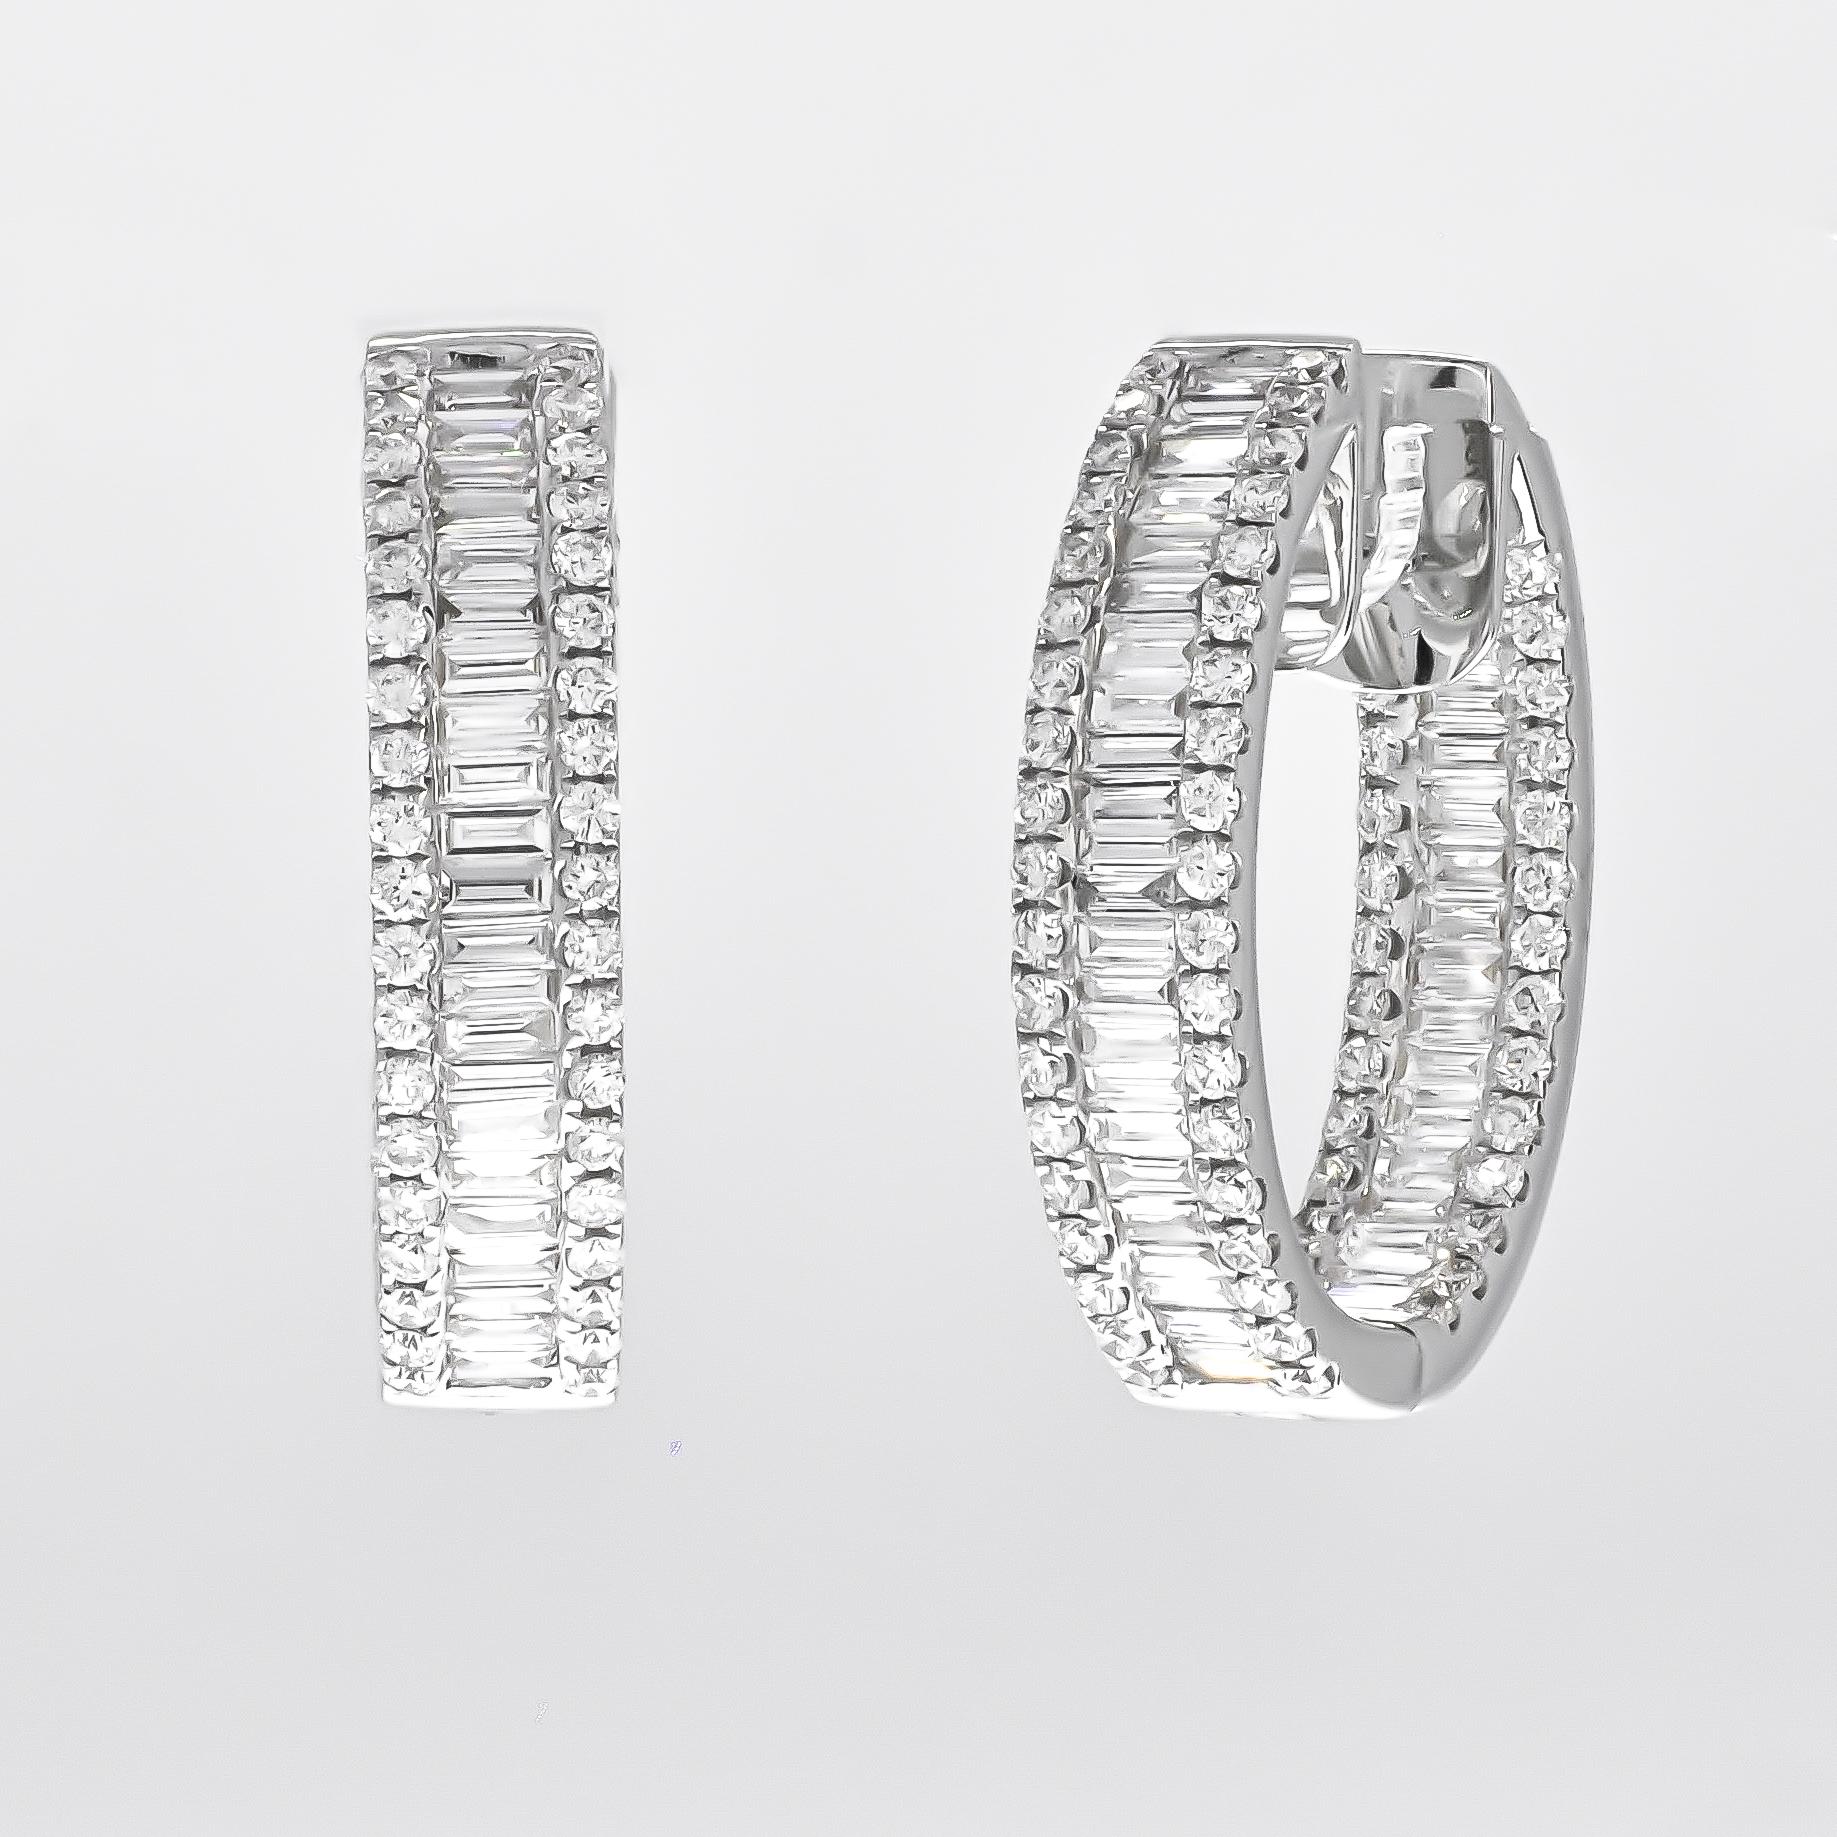 Introducing our Inside Outside Hoops Earrings: a symbol of timeless elegance. Crafted in white gold with 3 carats of natural diamonds, these earrings radiate luxury. Be the center of attention at any cocktail party as their brilliance captivates